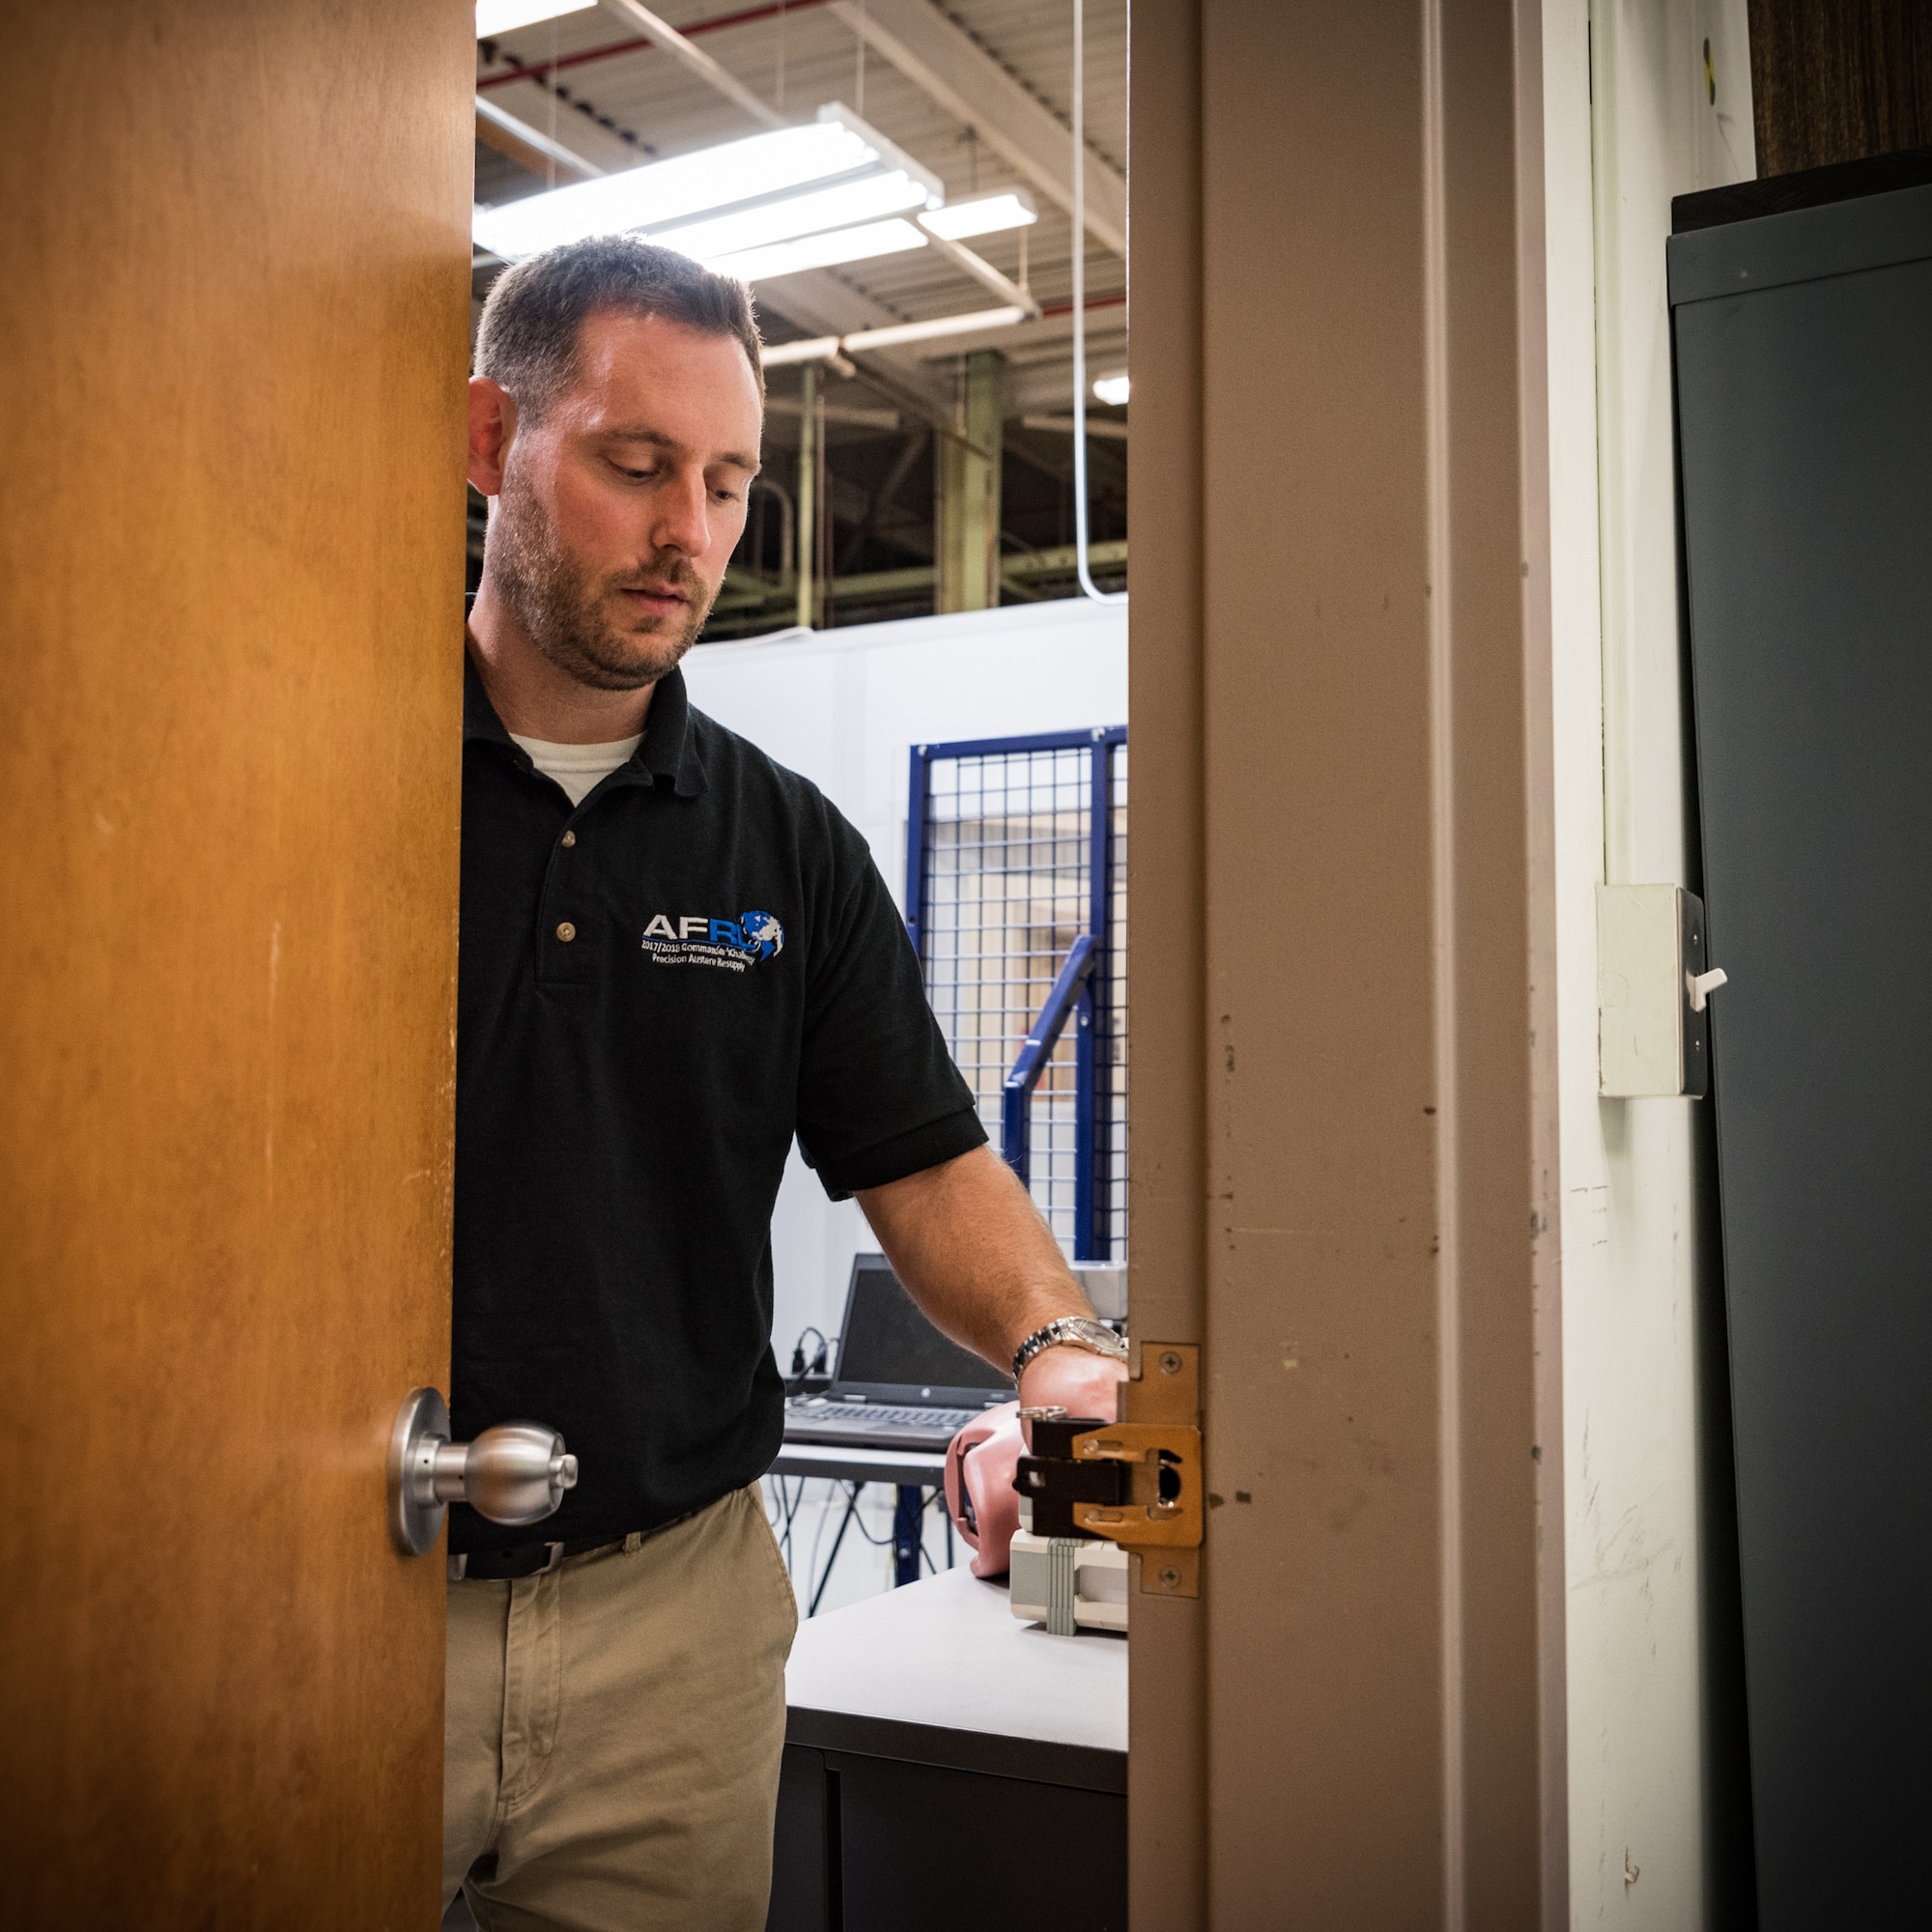 Dr. John McIntire, team lead and research psychologist in the Air Force Research Laboratory’s 711th Human Performance Wing, demonstrates how to use one of the portable door locks his team developed. This team has been selected for a 2019 Defense Innovation Award. (U.S. Air Force photo by Richard Eldridge)